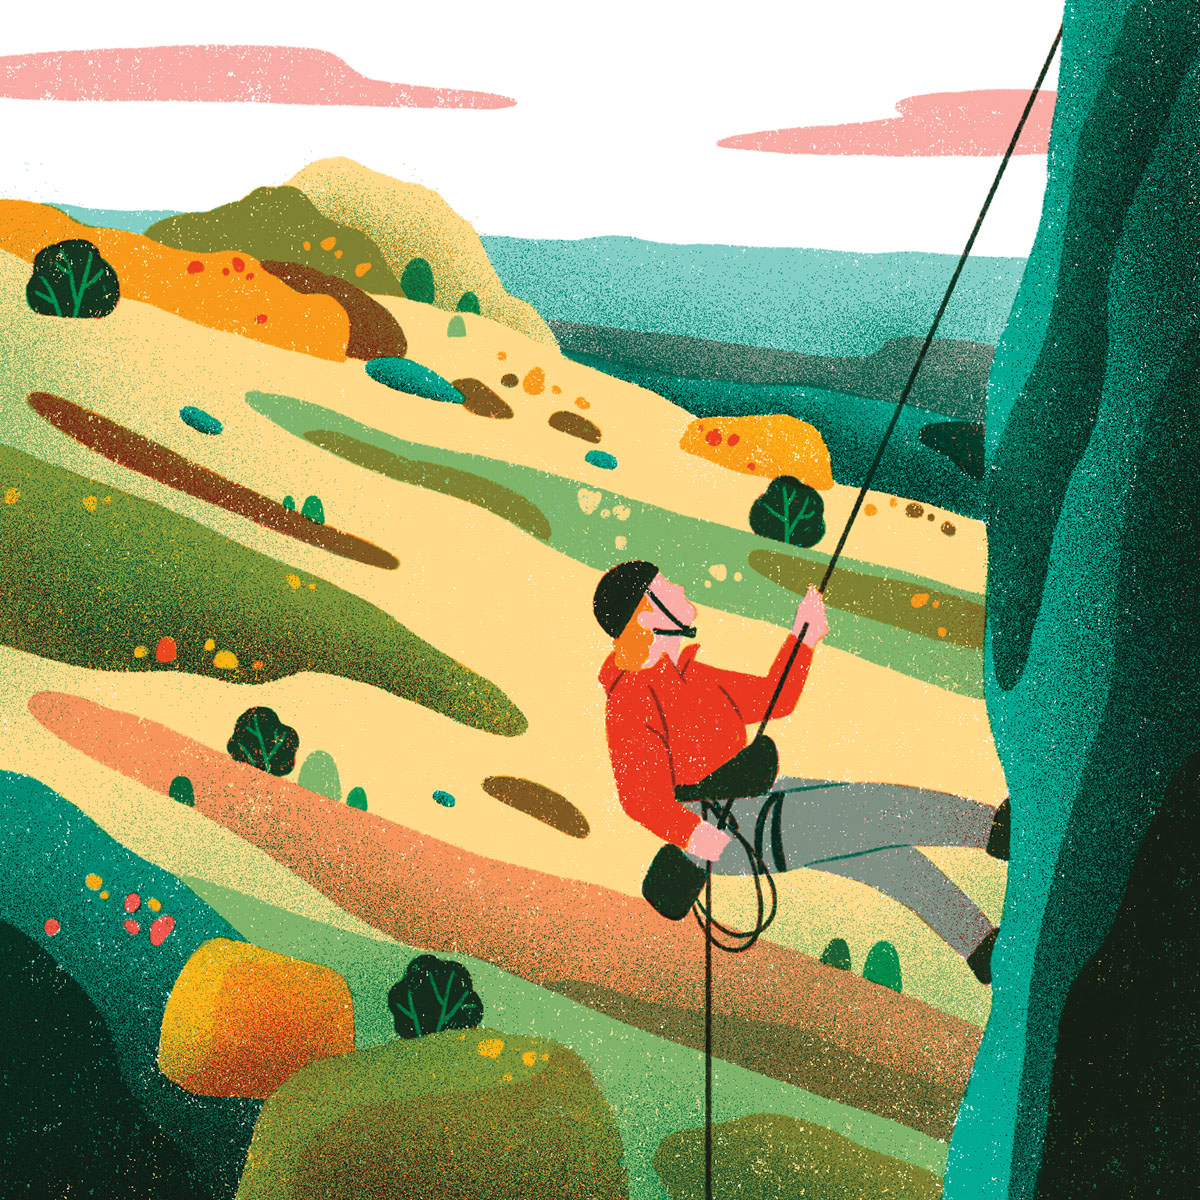 An illustration of a person in a red shirt and black helmet belaying down the side of a large rock